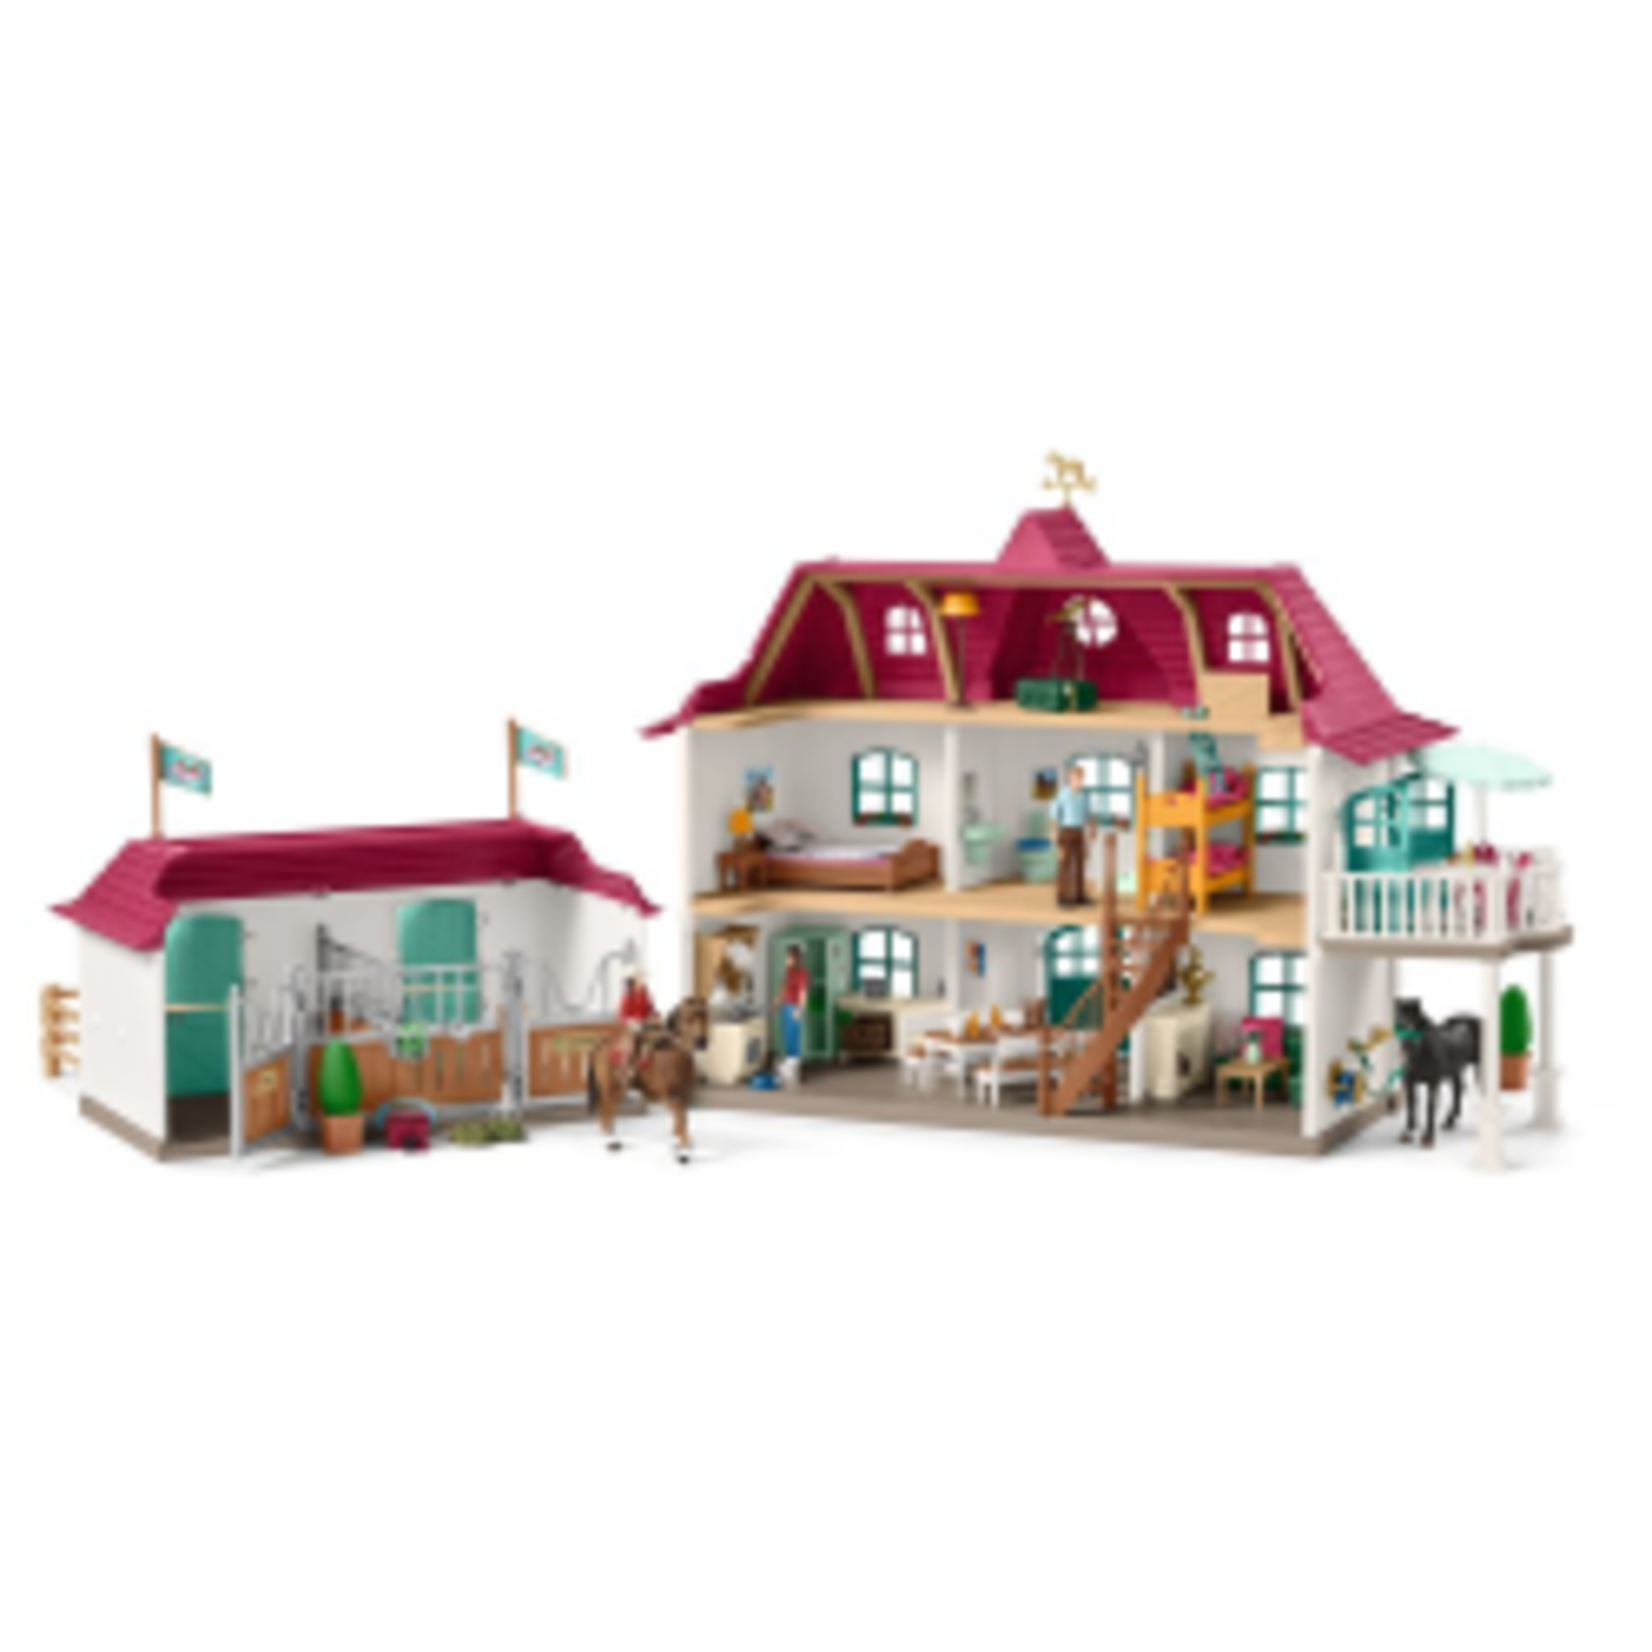 SCHLEICH SCHLEICH HORSE CLUB - LARGE HORSE STABLE WITH HOUSE & STABLE